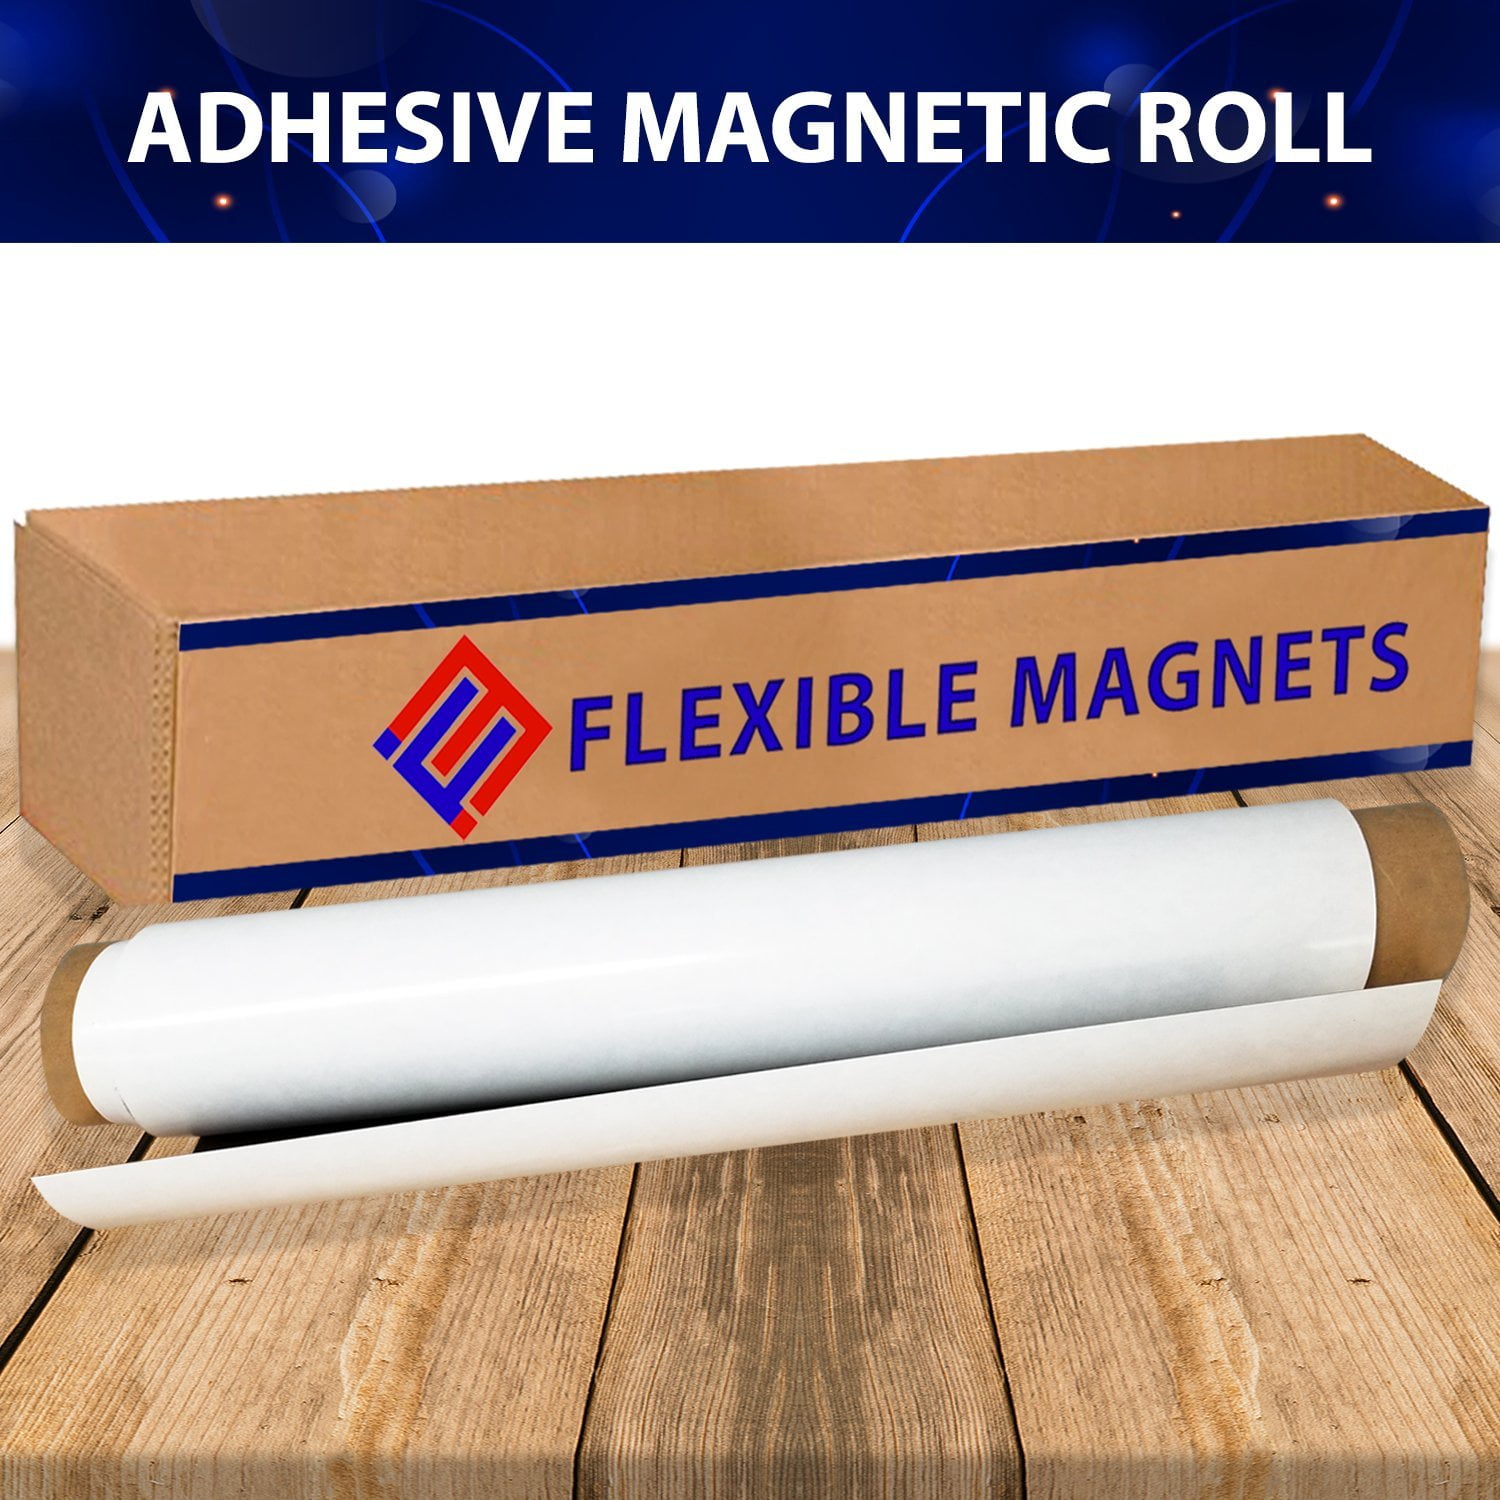 12 Self Adhesive Flexible Magnetic Sheets 9 x 12 inches 